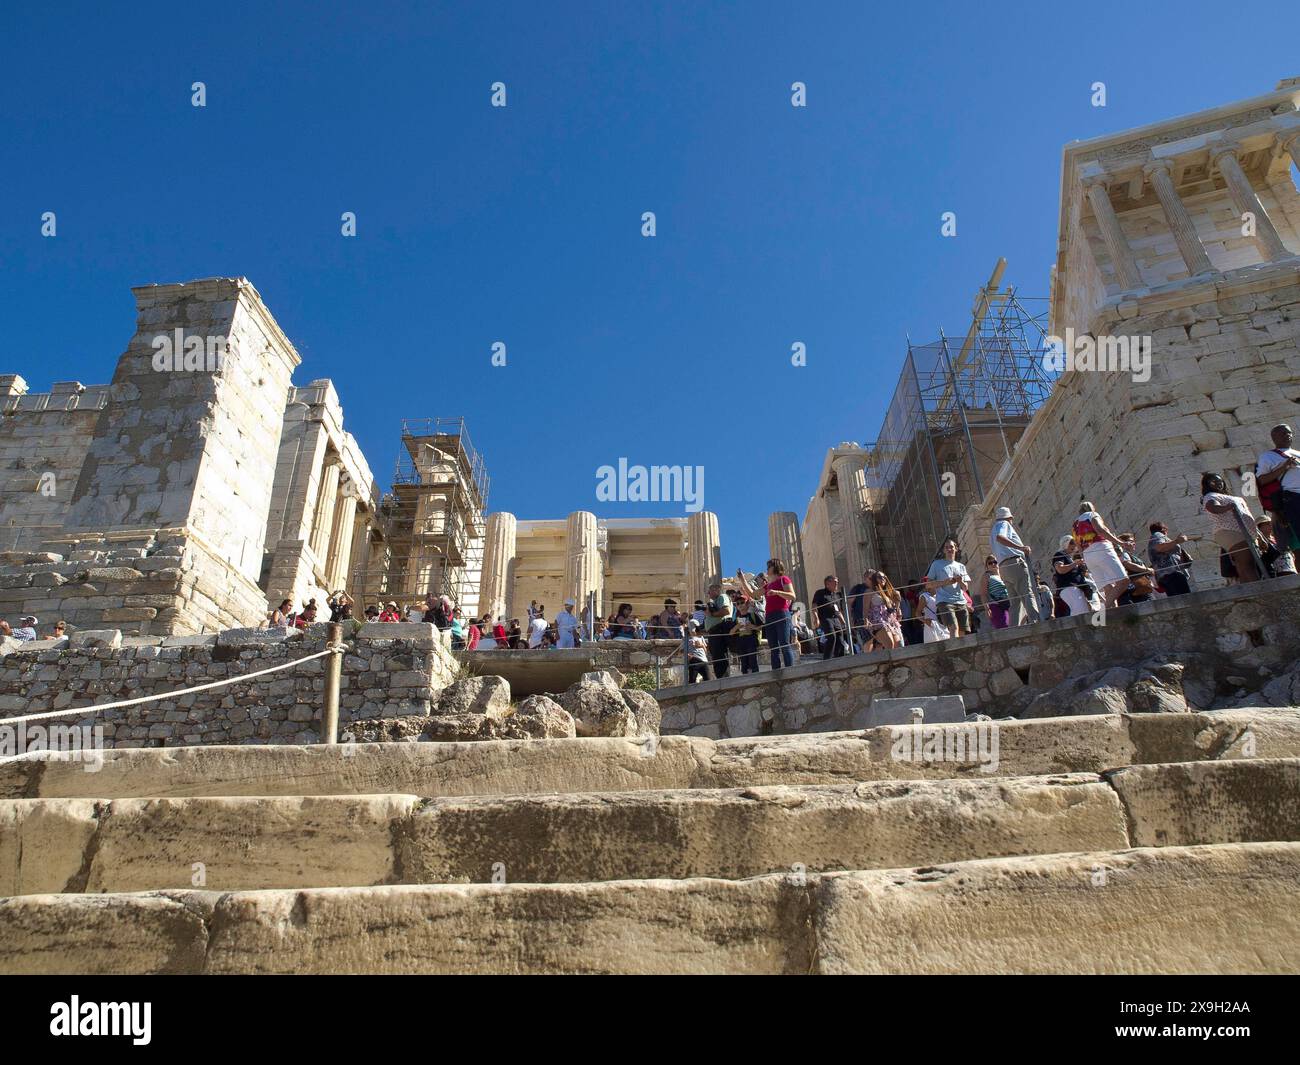 Many tourists climbing up the stone steps of a ruin on the Acropolis, Ancient buildings with columns and trees on the Acropolis in Athens against a Stock Photo